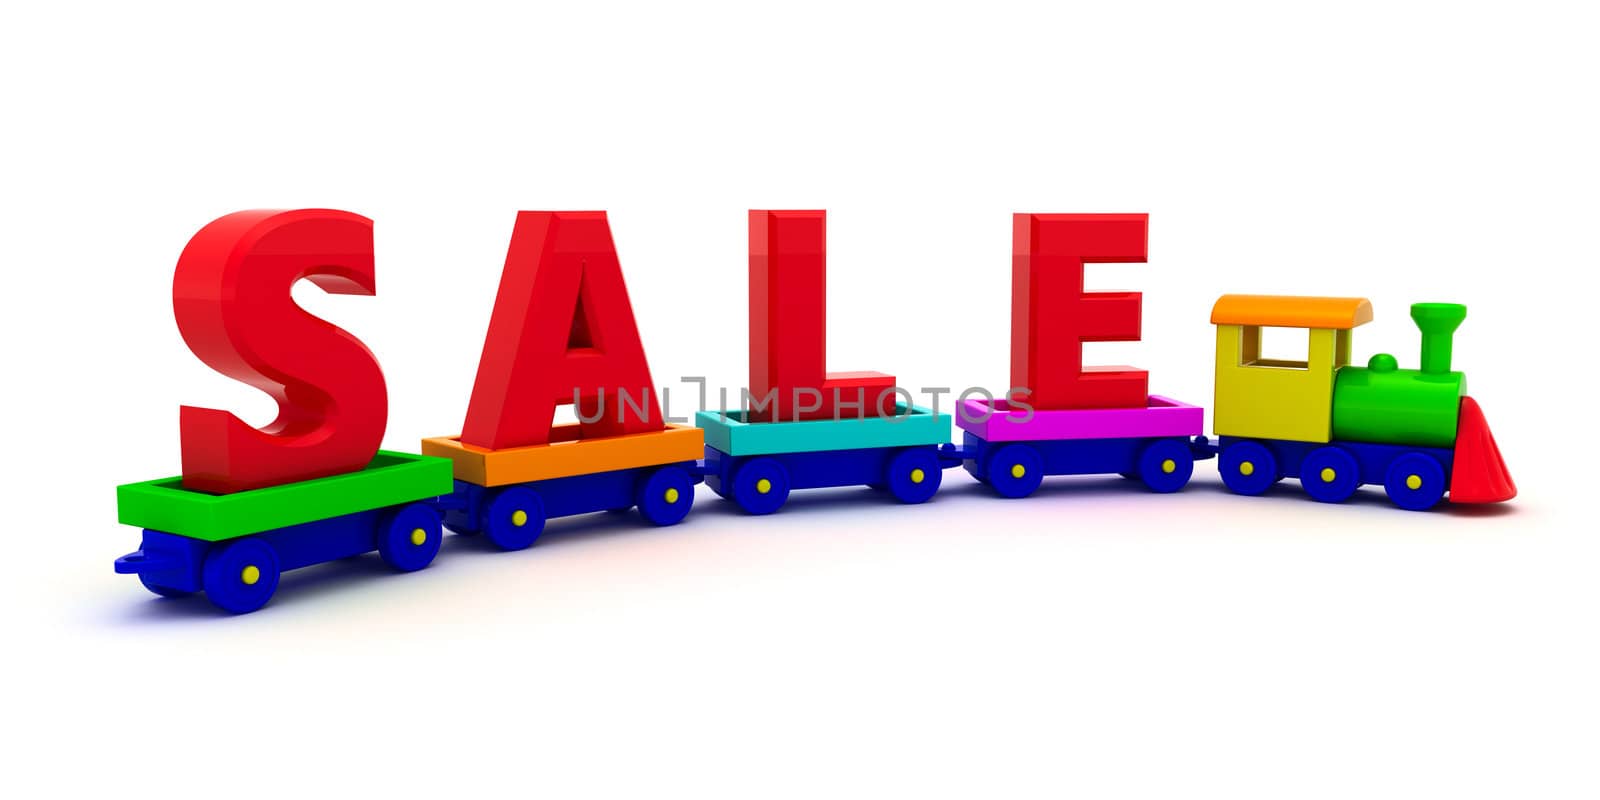 The word "Sale" on the toy train